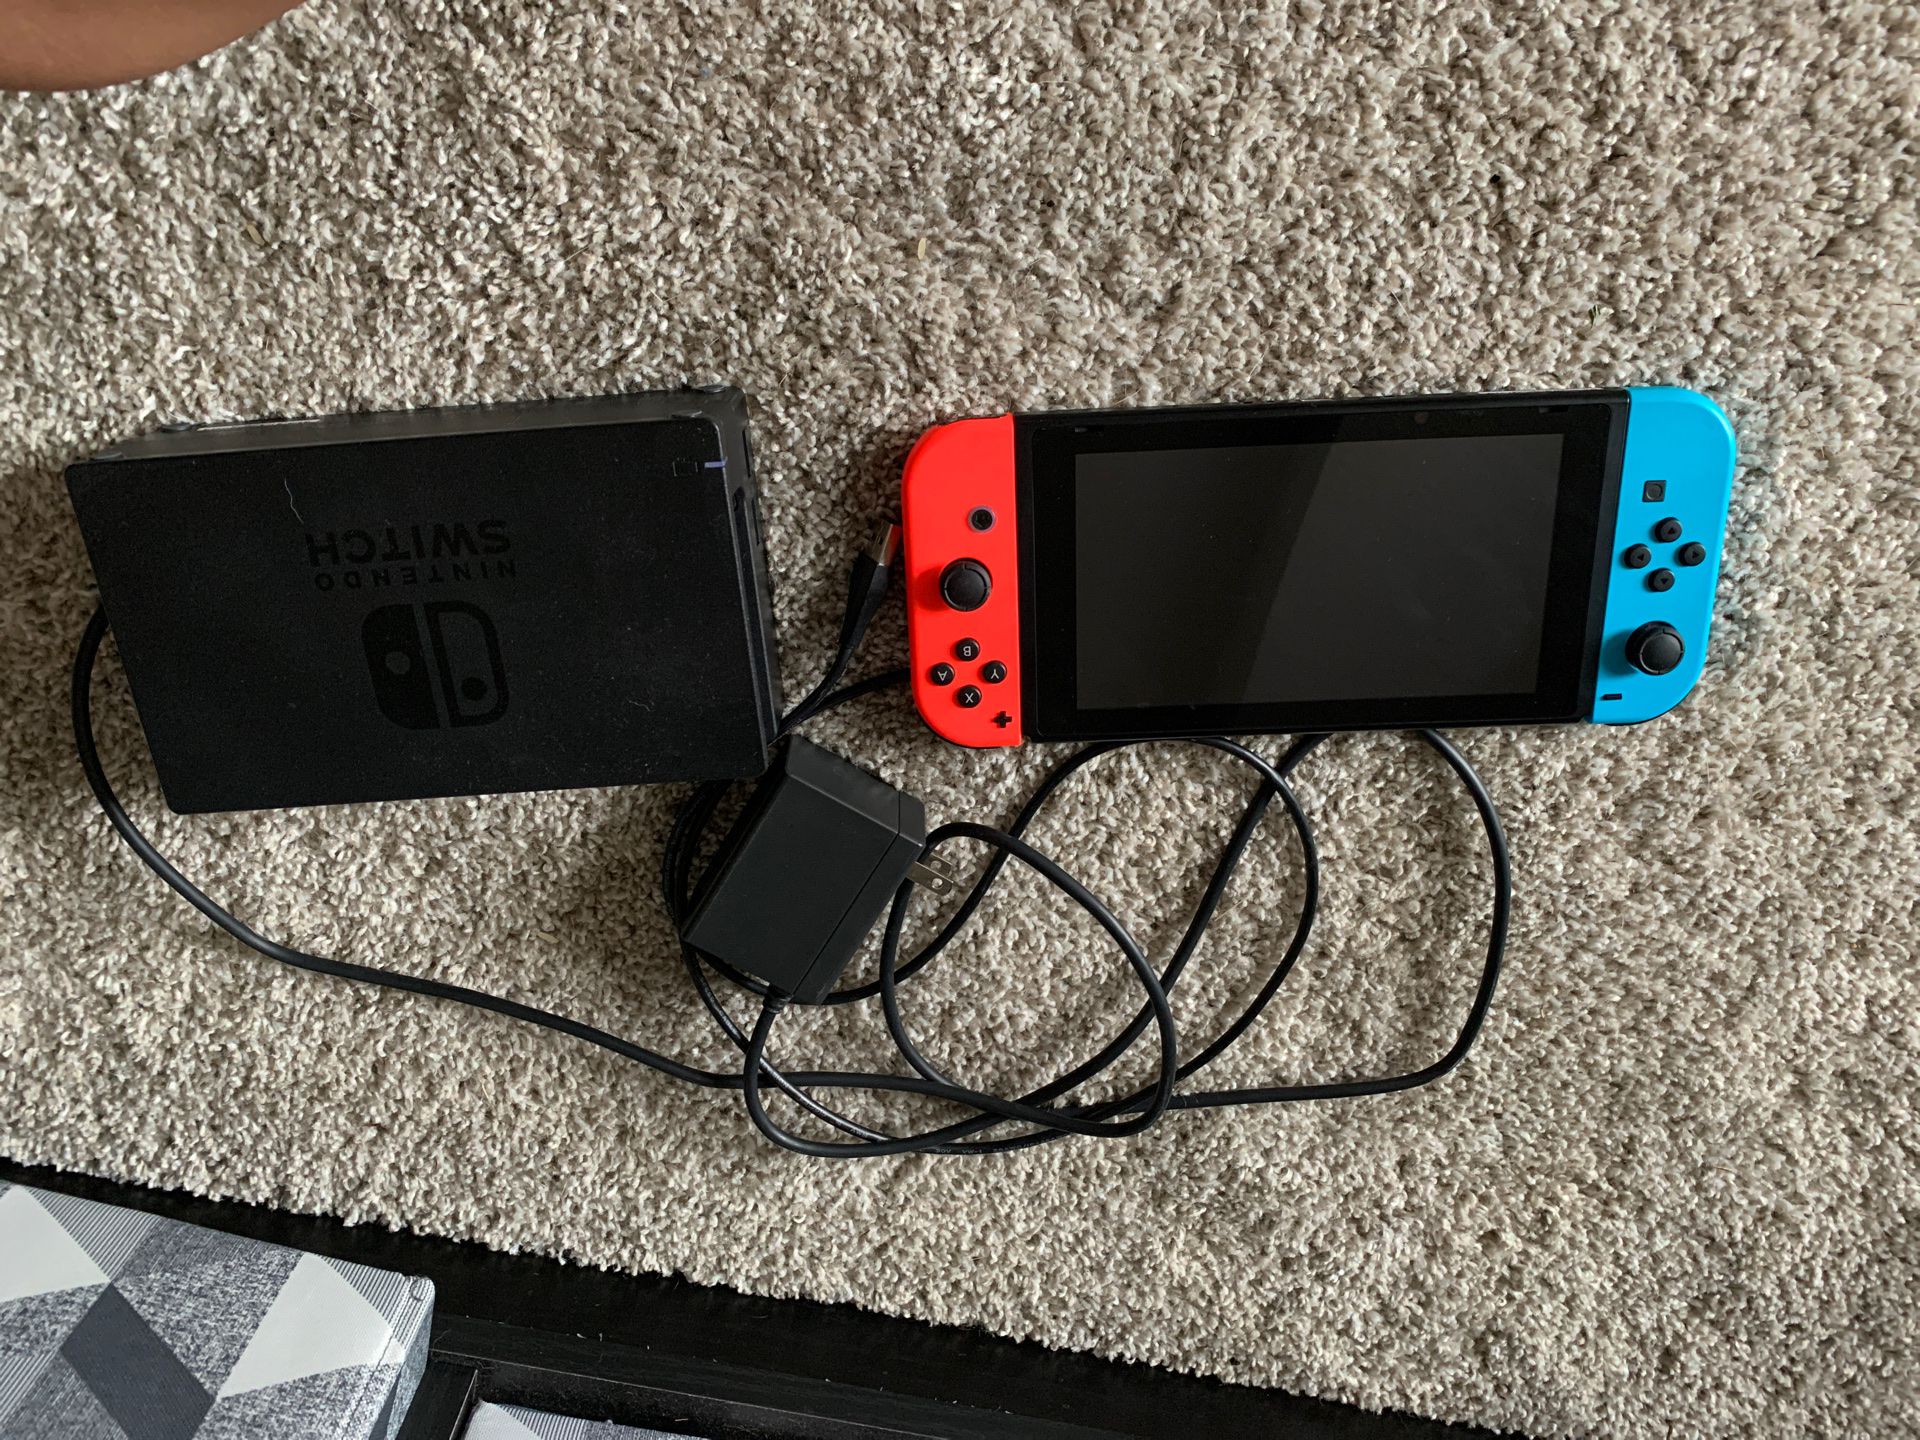 Used Nintendo Switch With 2 Games